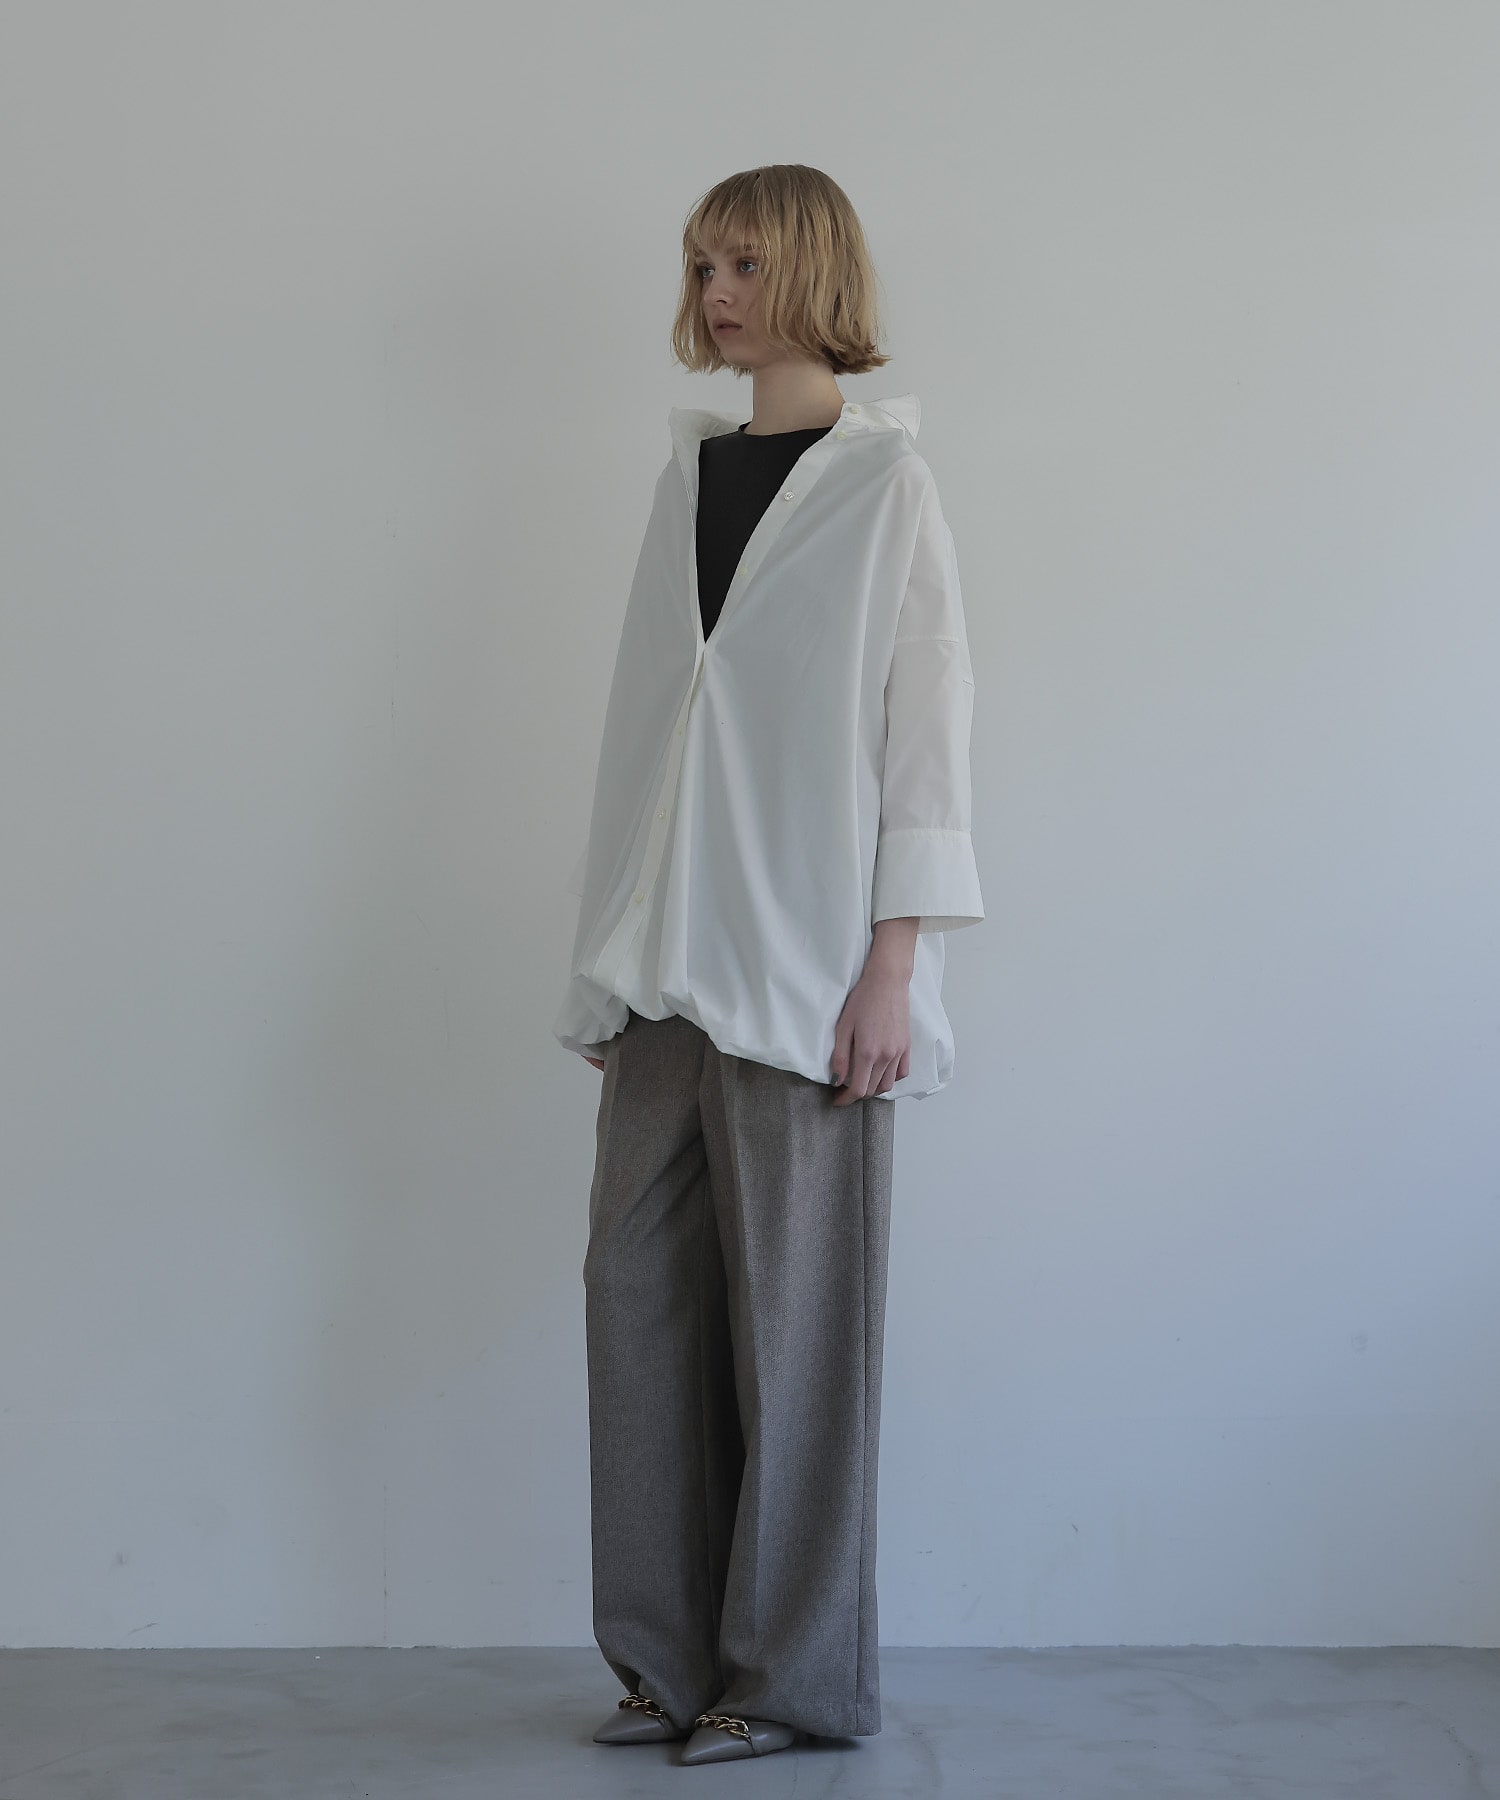 typewriter ×jersey join blouse | AND ON JIONE STORE（アンドオン